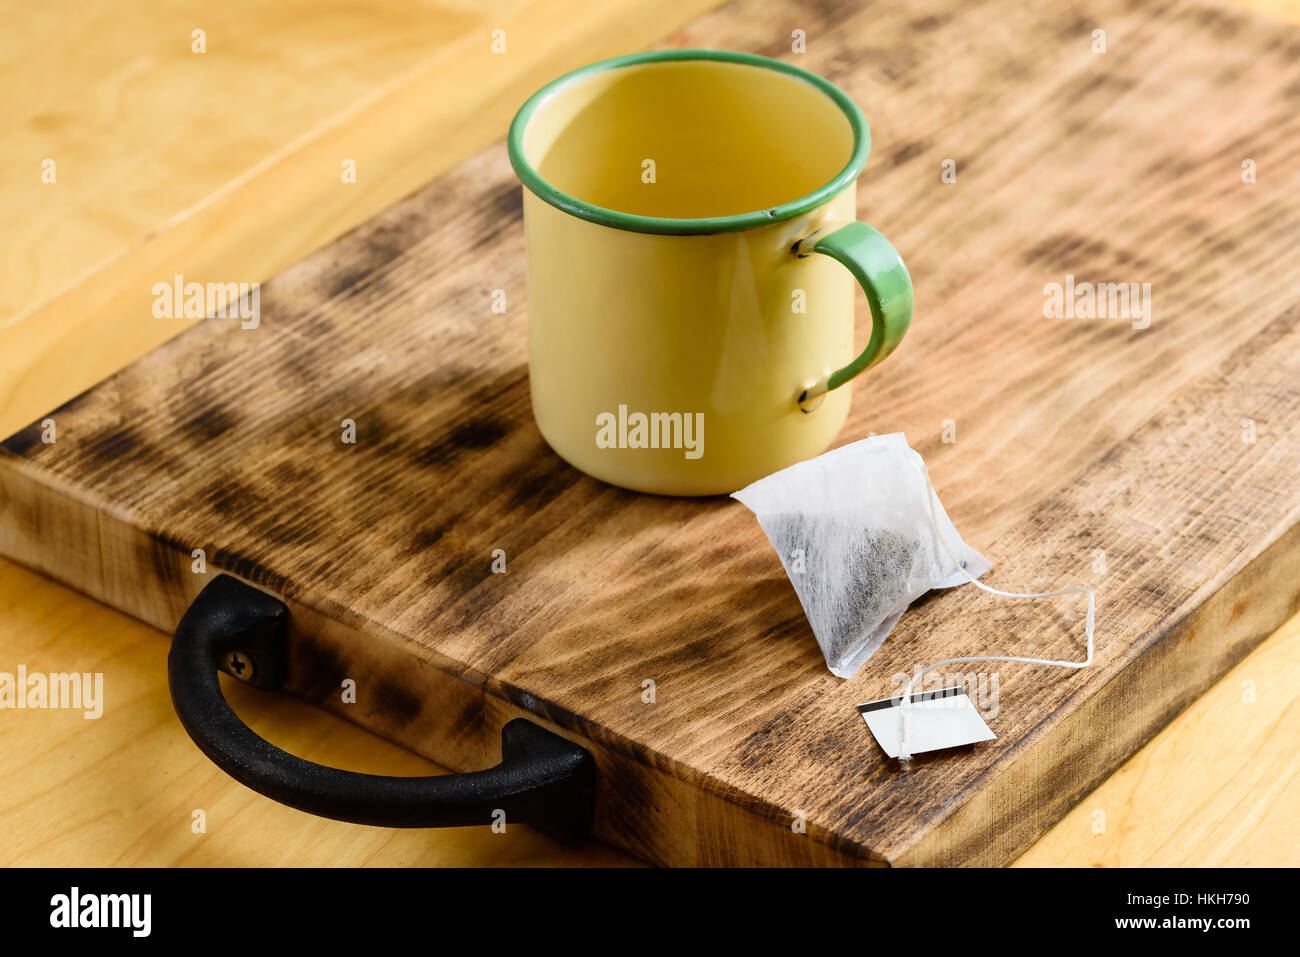 Paper tea bag with yellow and green enameled tea cup on wooden tray with iron handle. Stock Photo